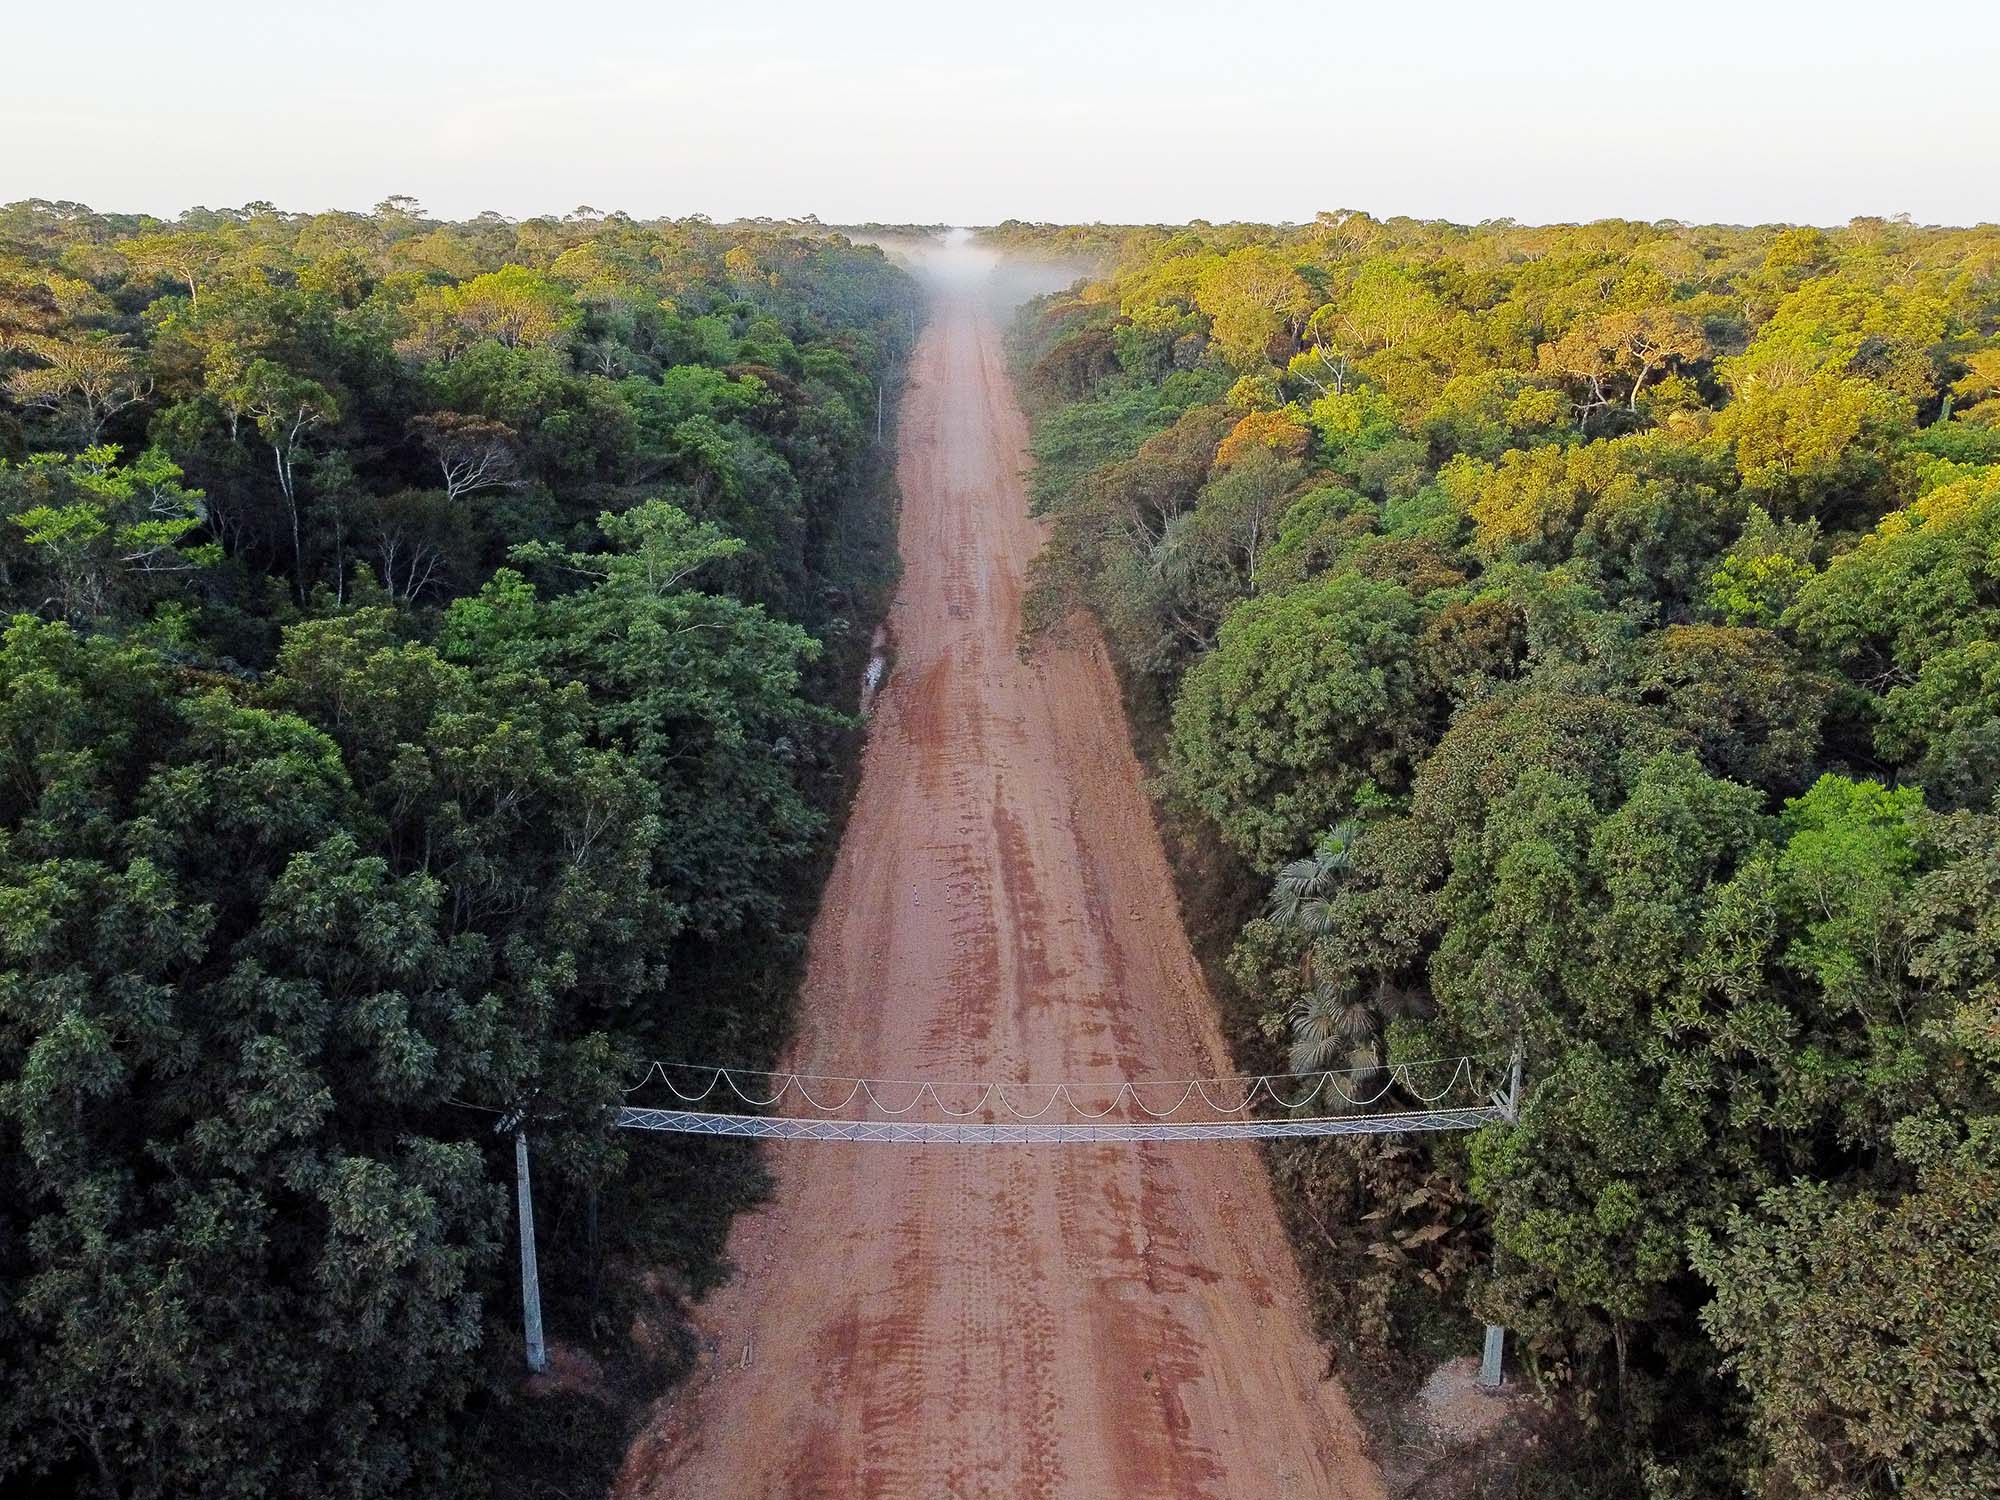 View from above of a reddish dirt road with jungle on either side, crossed by a high rope bridge